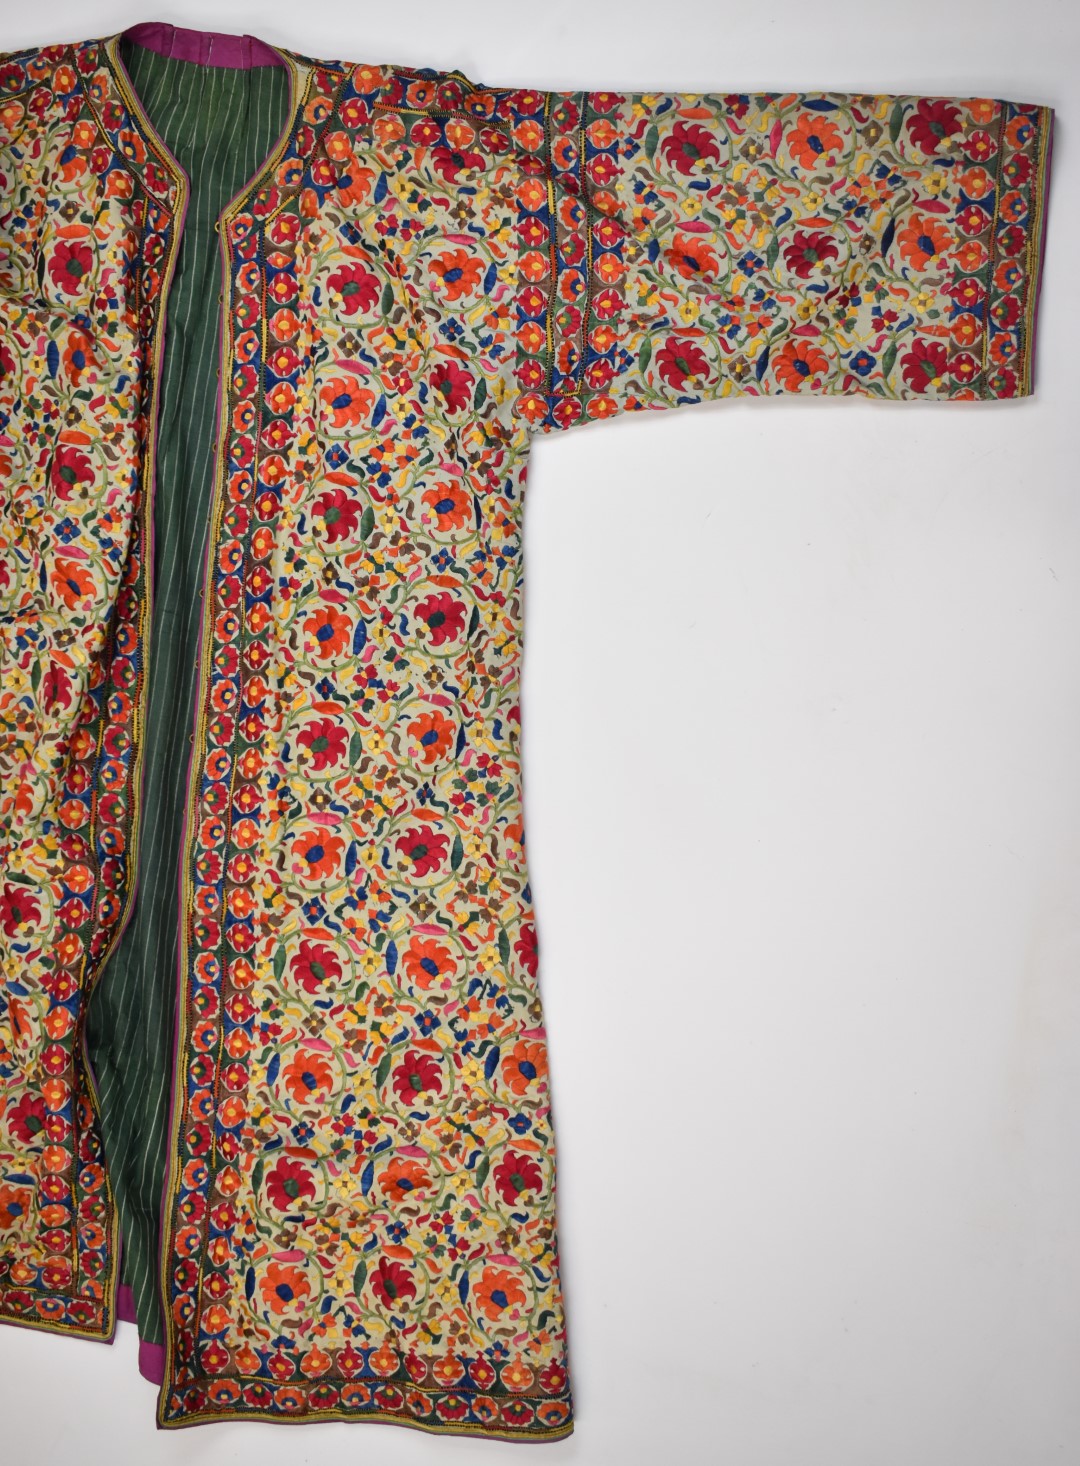 19th / 20thC Indian embroidered coat or coat dress, with a note stating the coat was gifted in the - Image 2 of 5